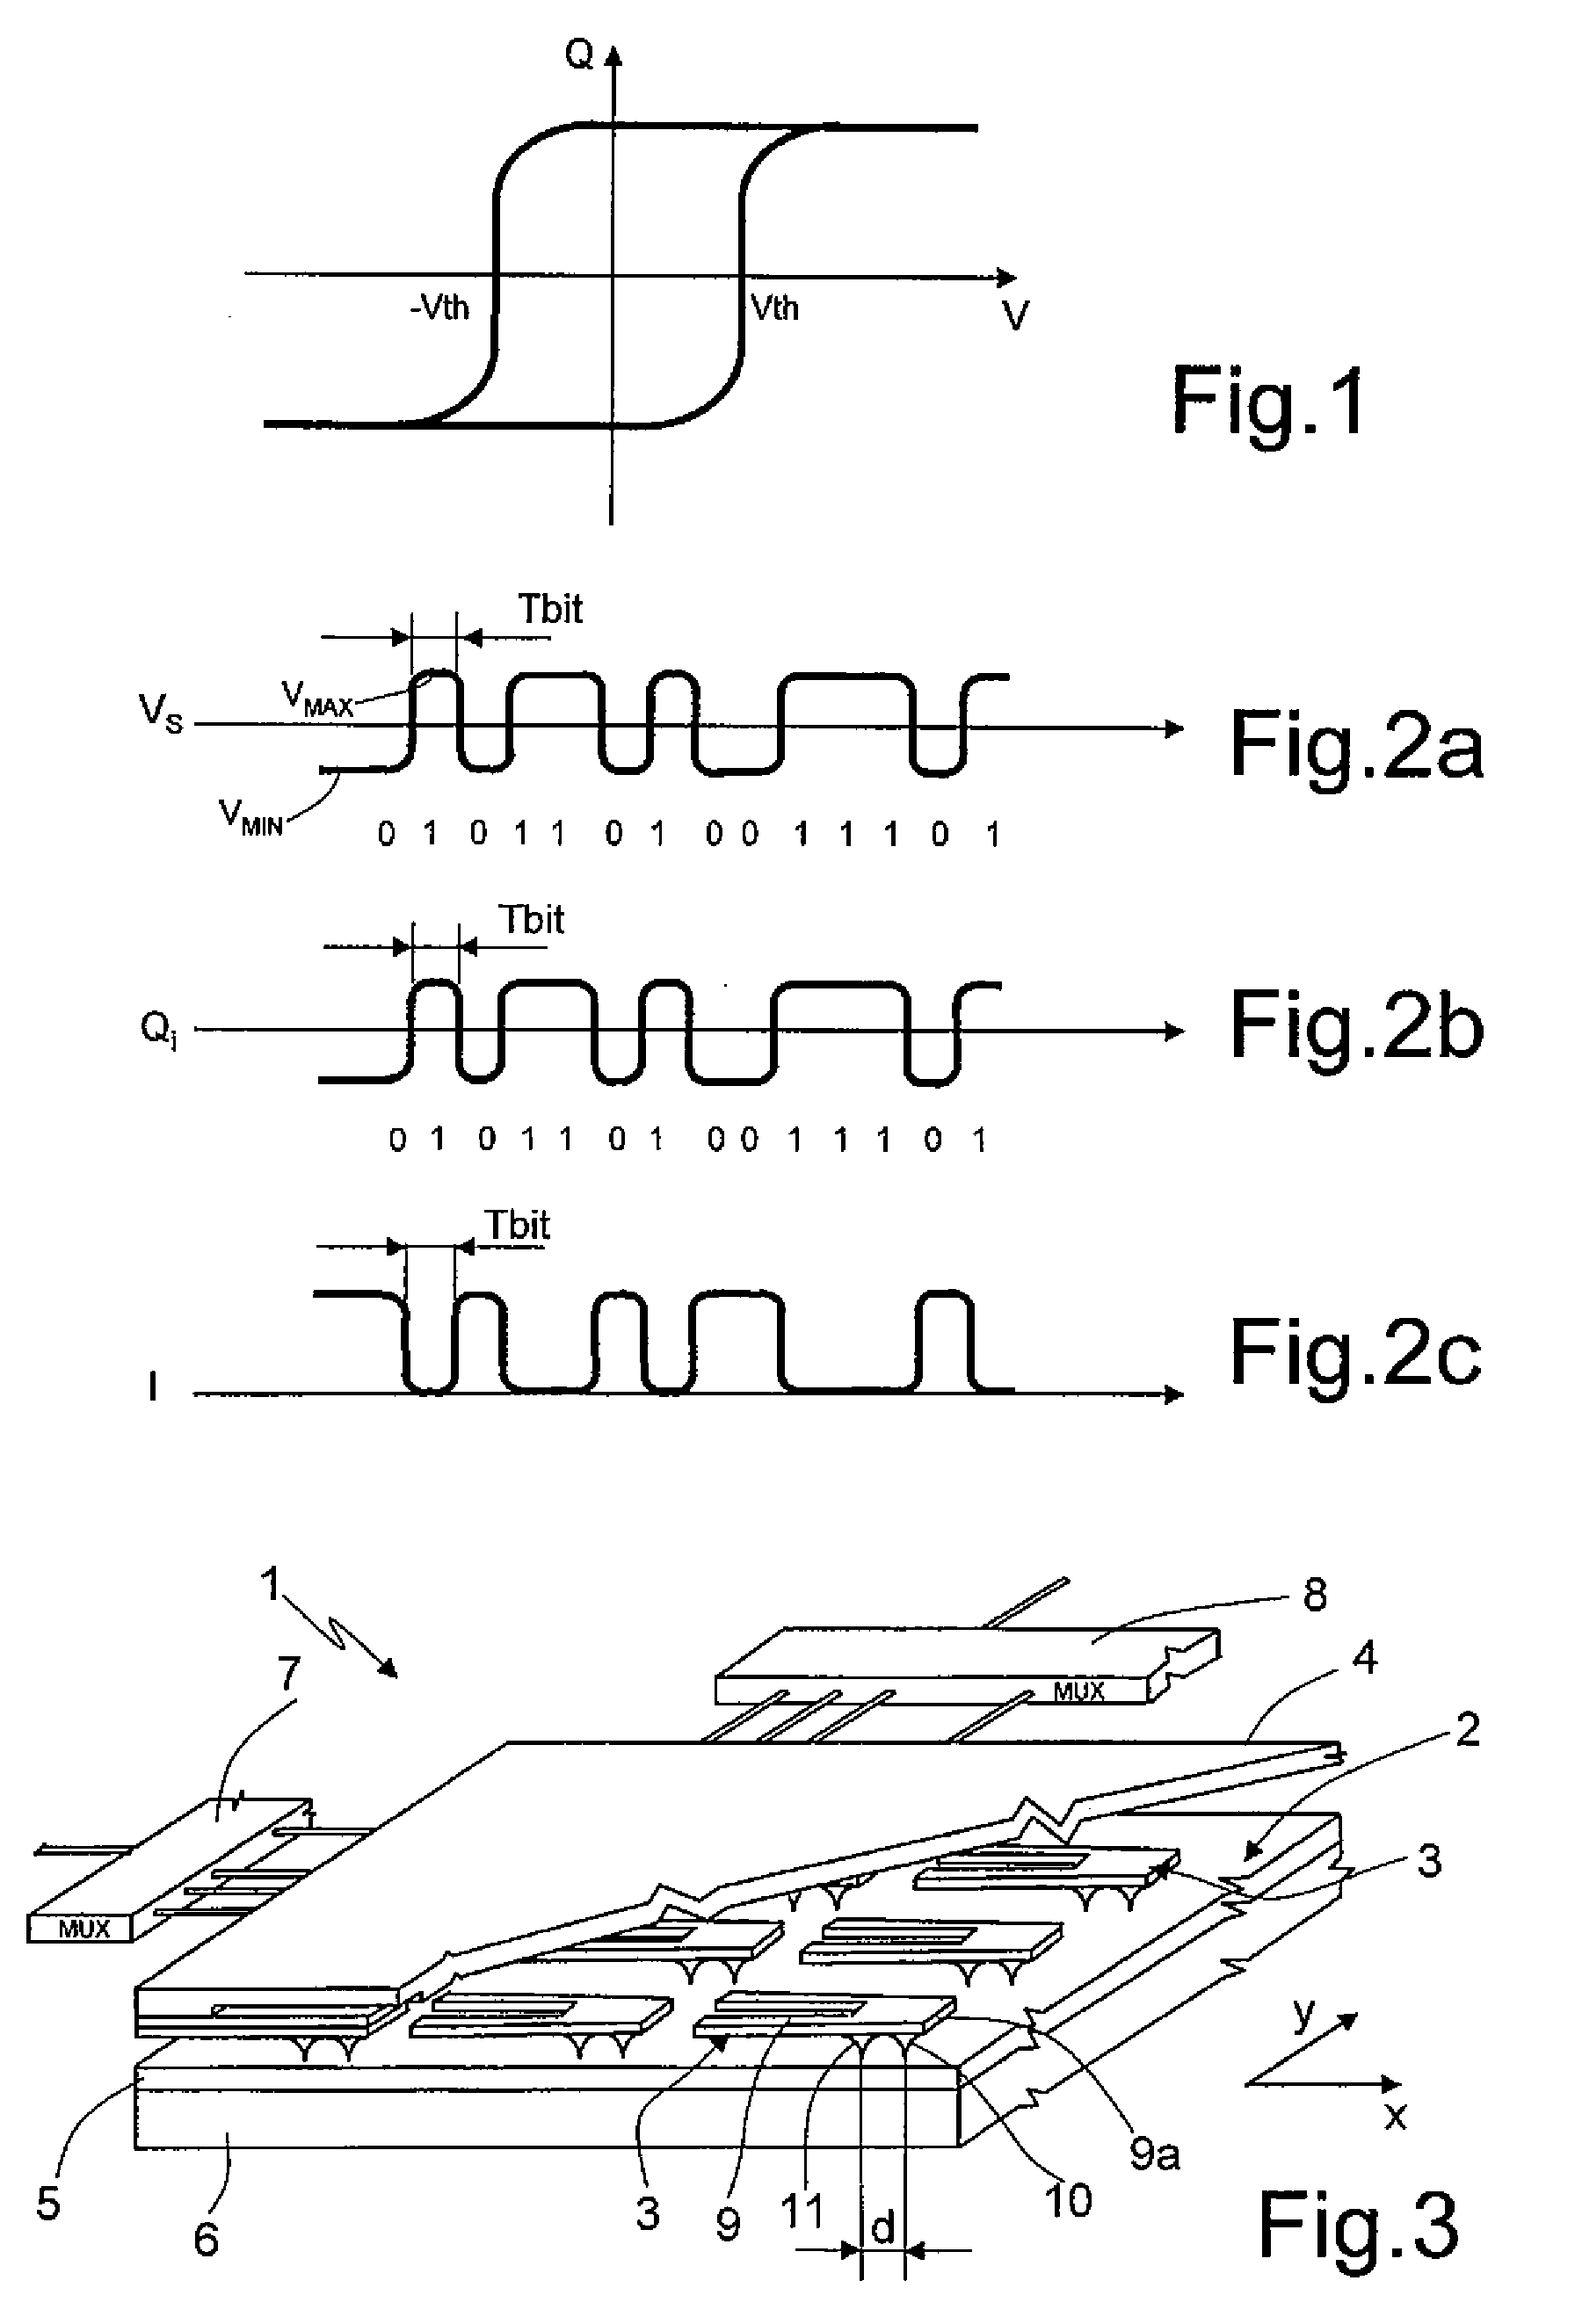 Read/write transducer for a ferroelectric storage medium, and corresponding storage device and method